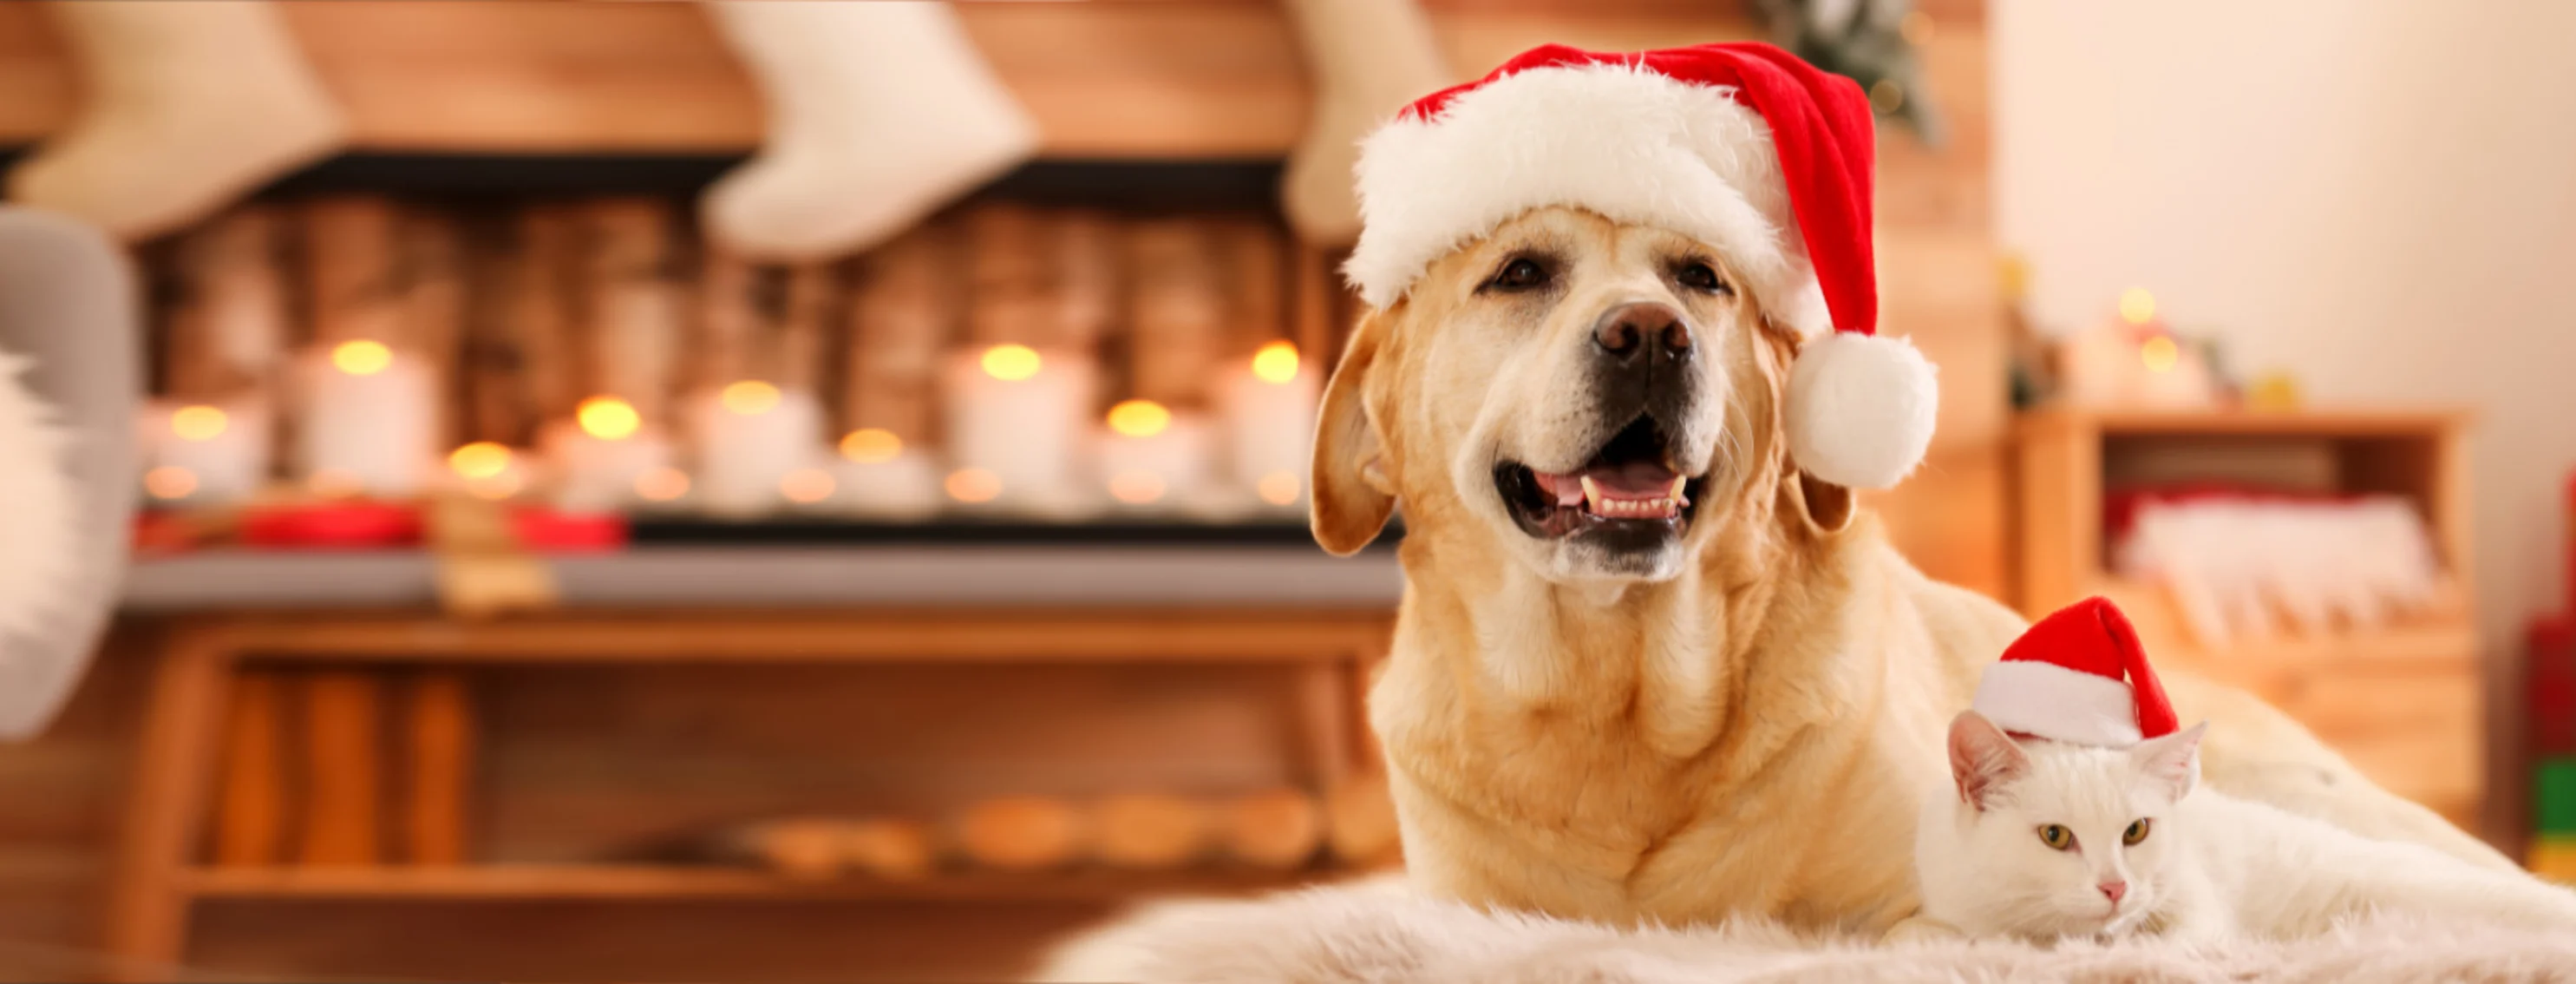 Golden Retriever (Dog) and a White Cat Wearing a Santa Hat